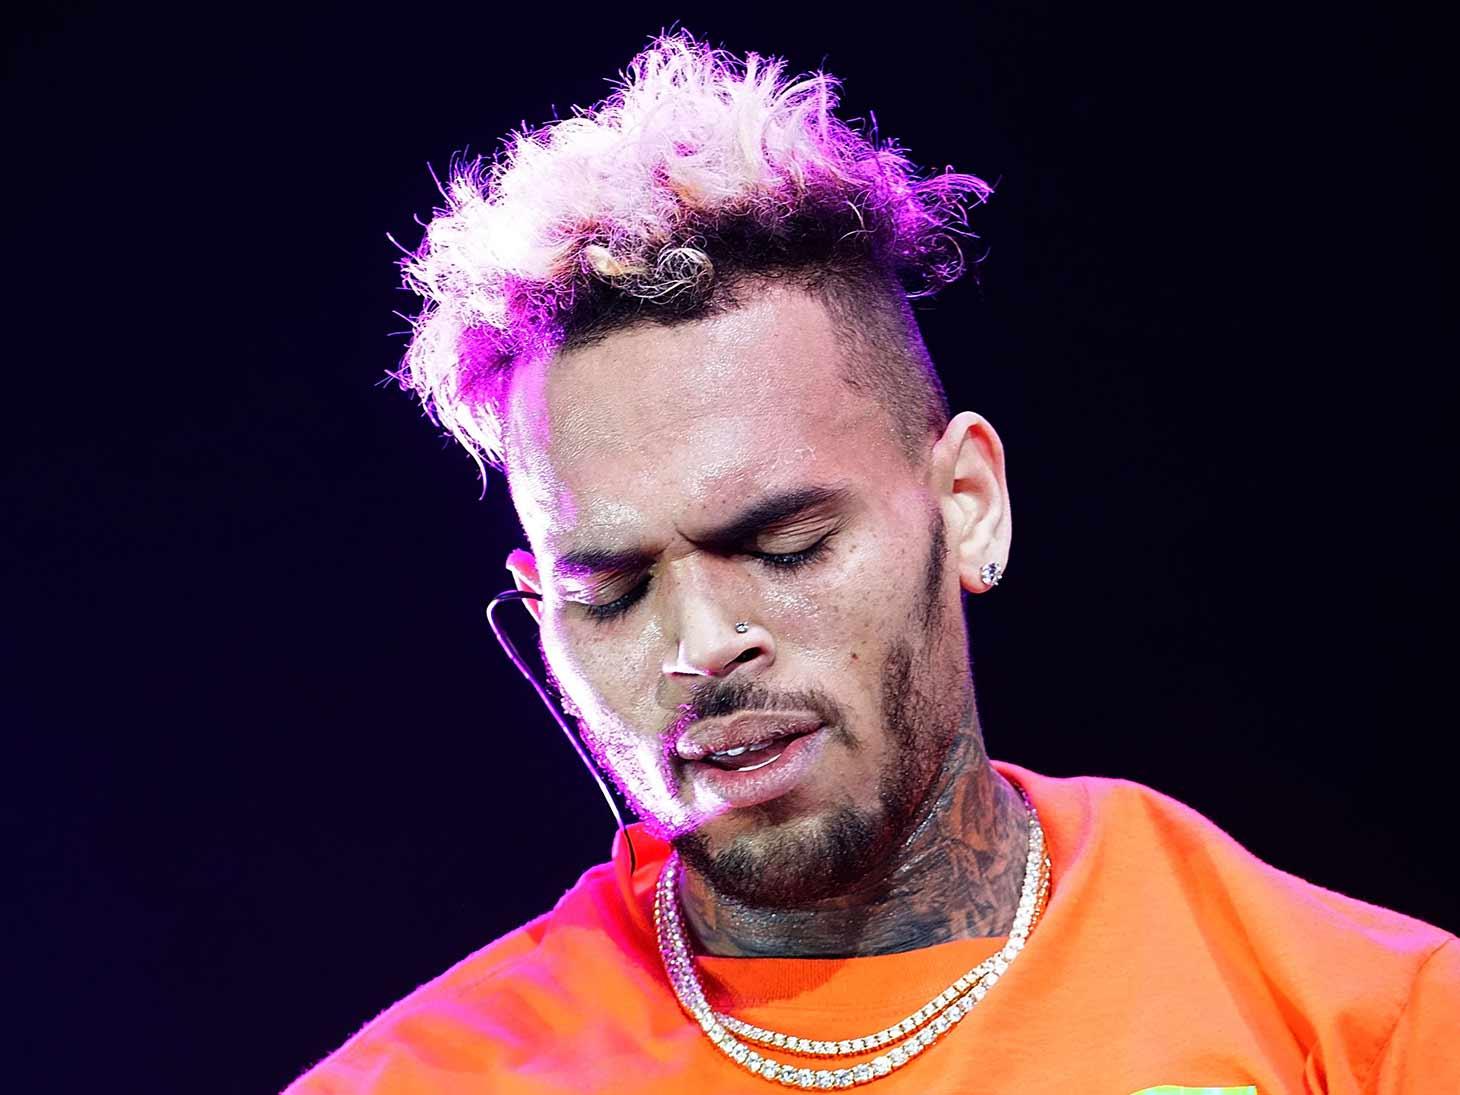 Chris Brown Maintains His Innocence After Rape Allegation